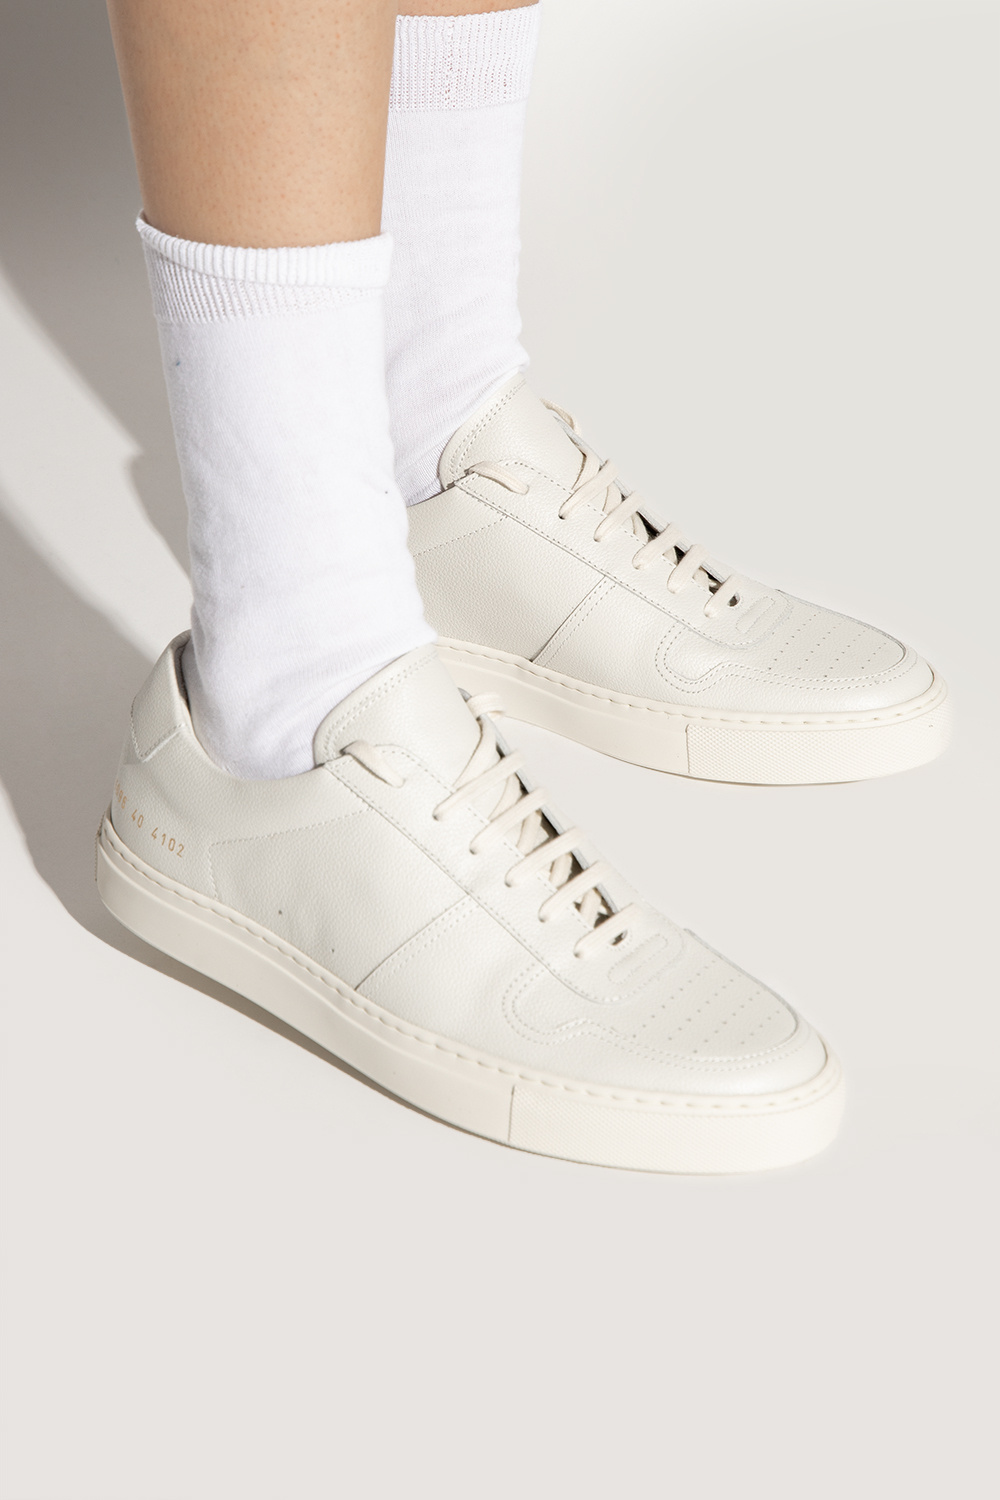 Common Projects ‘Bball Low Bumpy’ sneakers